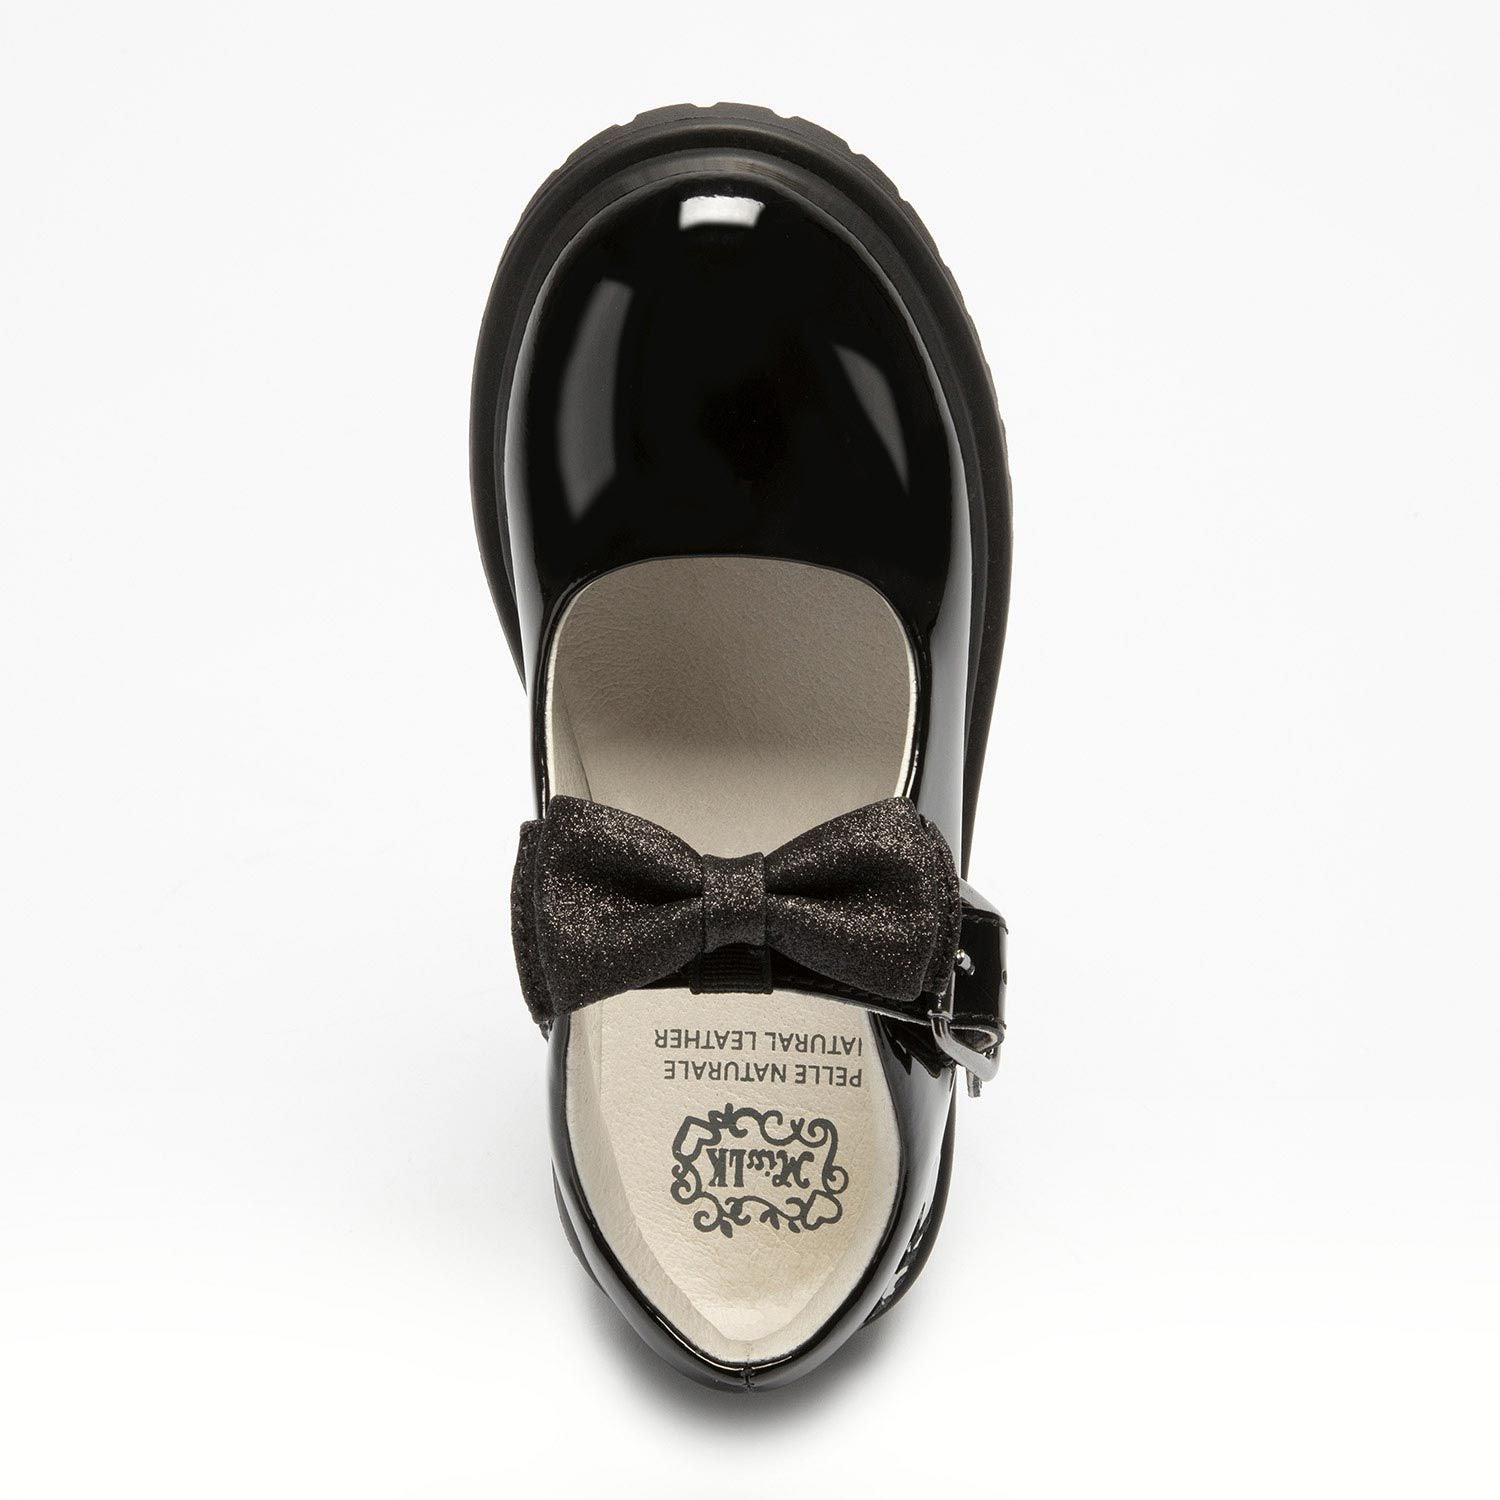 A girls chunky Mary Jane school shoe by Lelli Kelly, style LK8359 Mollie, in black patent leather with buckle fastening and detachable fabric bow. Above view.